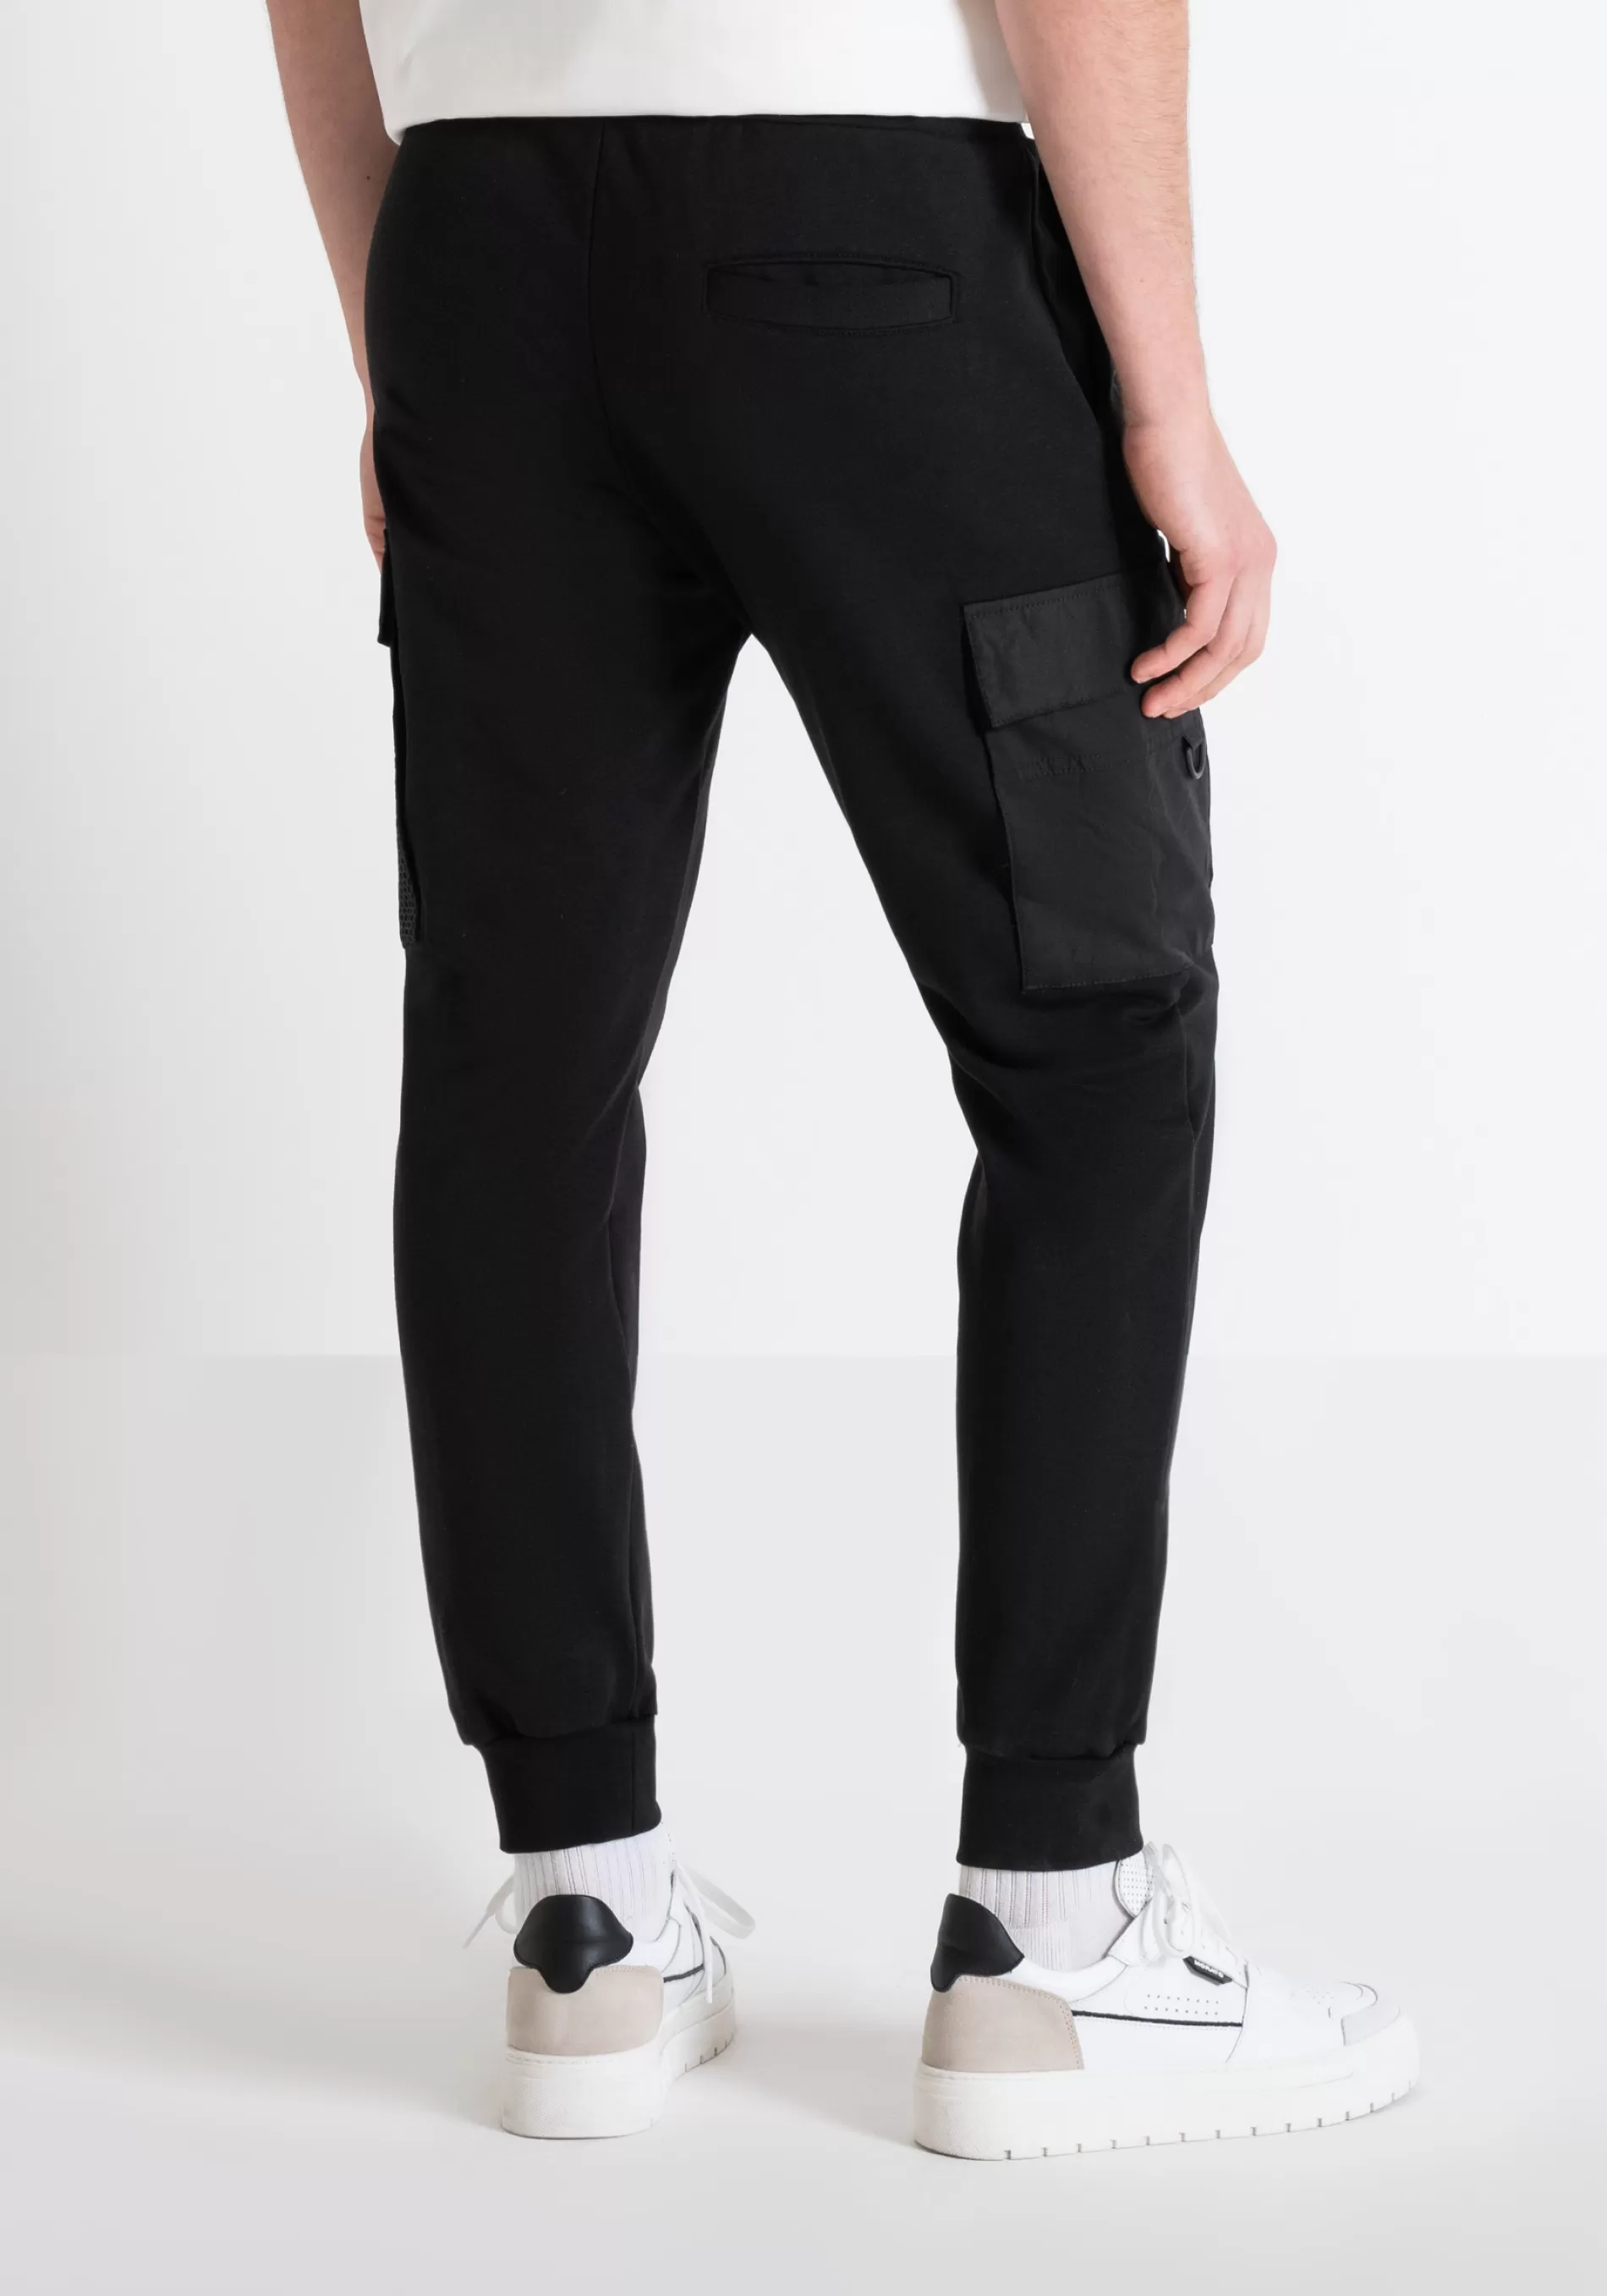 Best Sale REGULAR FIT SWEATPANTS IN SUSTAINABLE COTTON-POLYESTER BLEND WITH LOGO PATCH Trousers